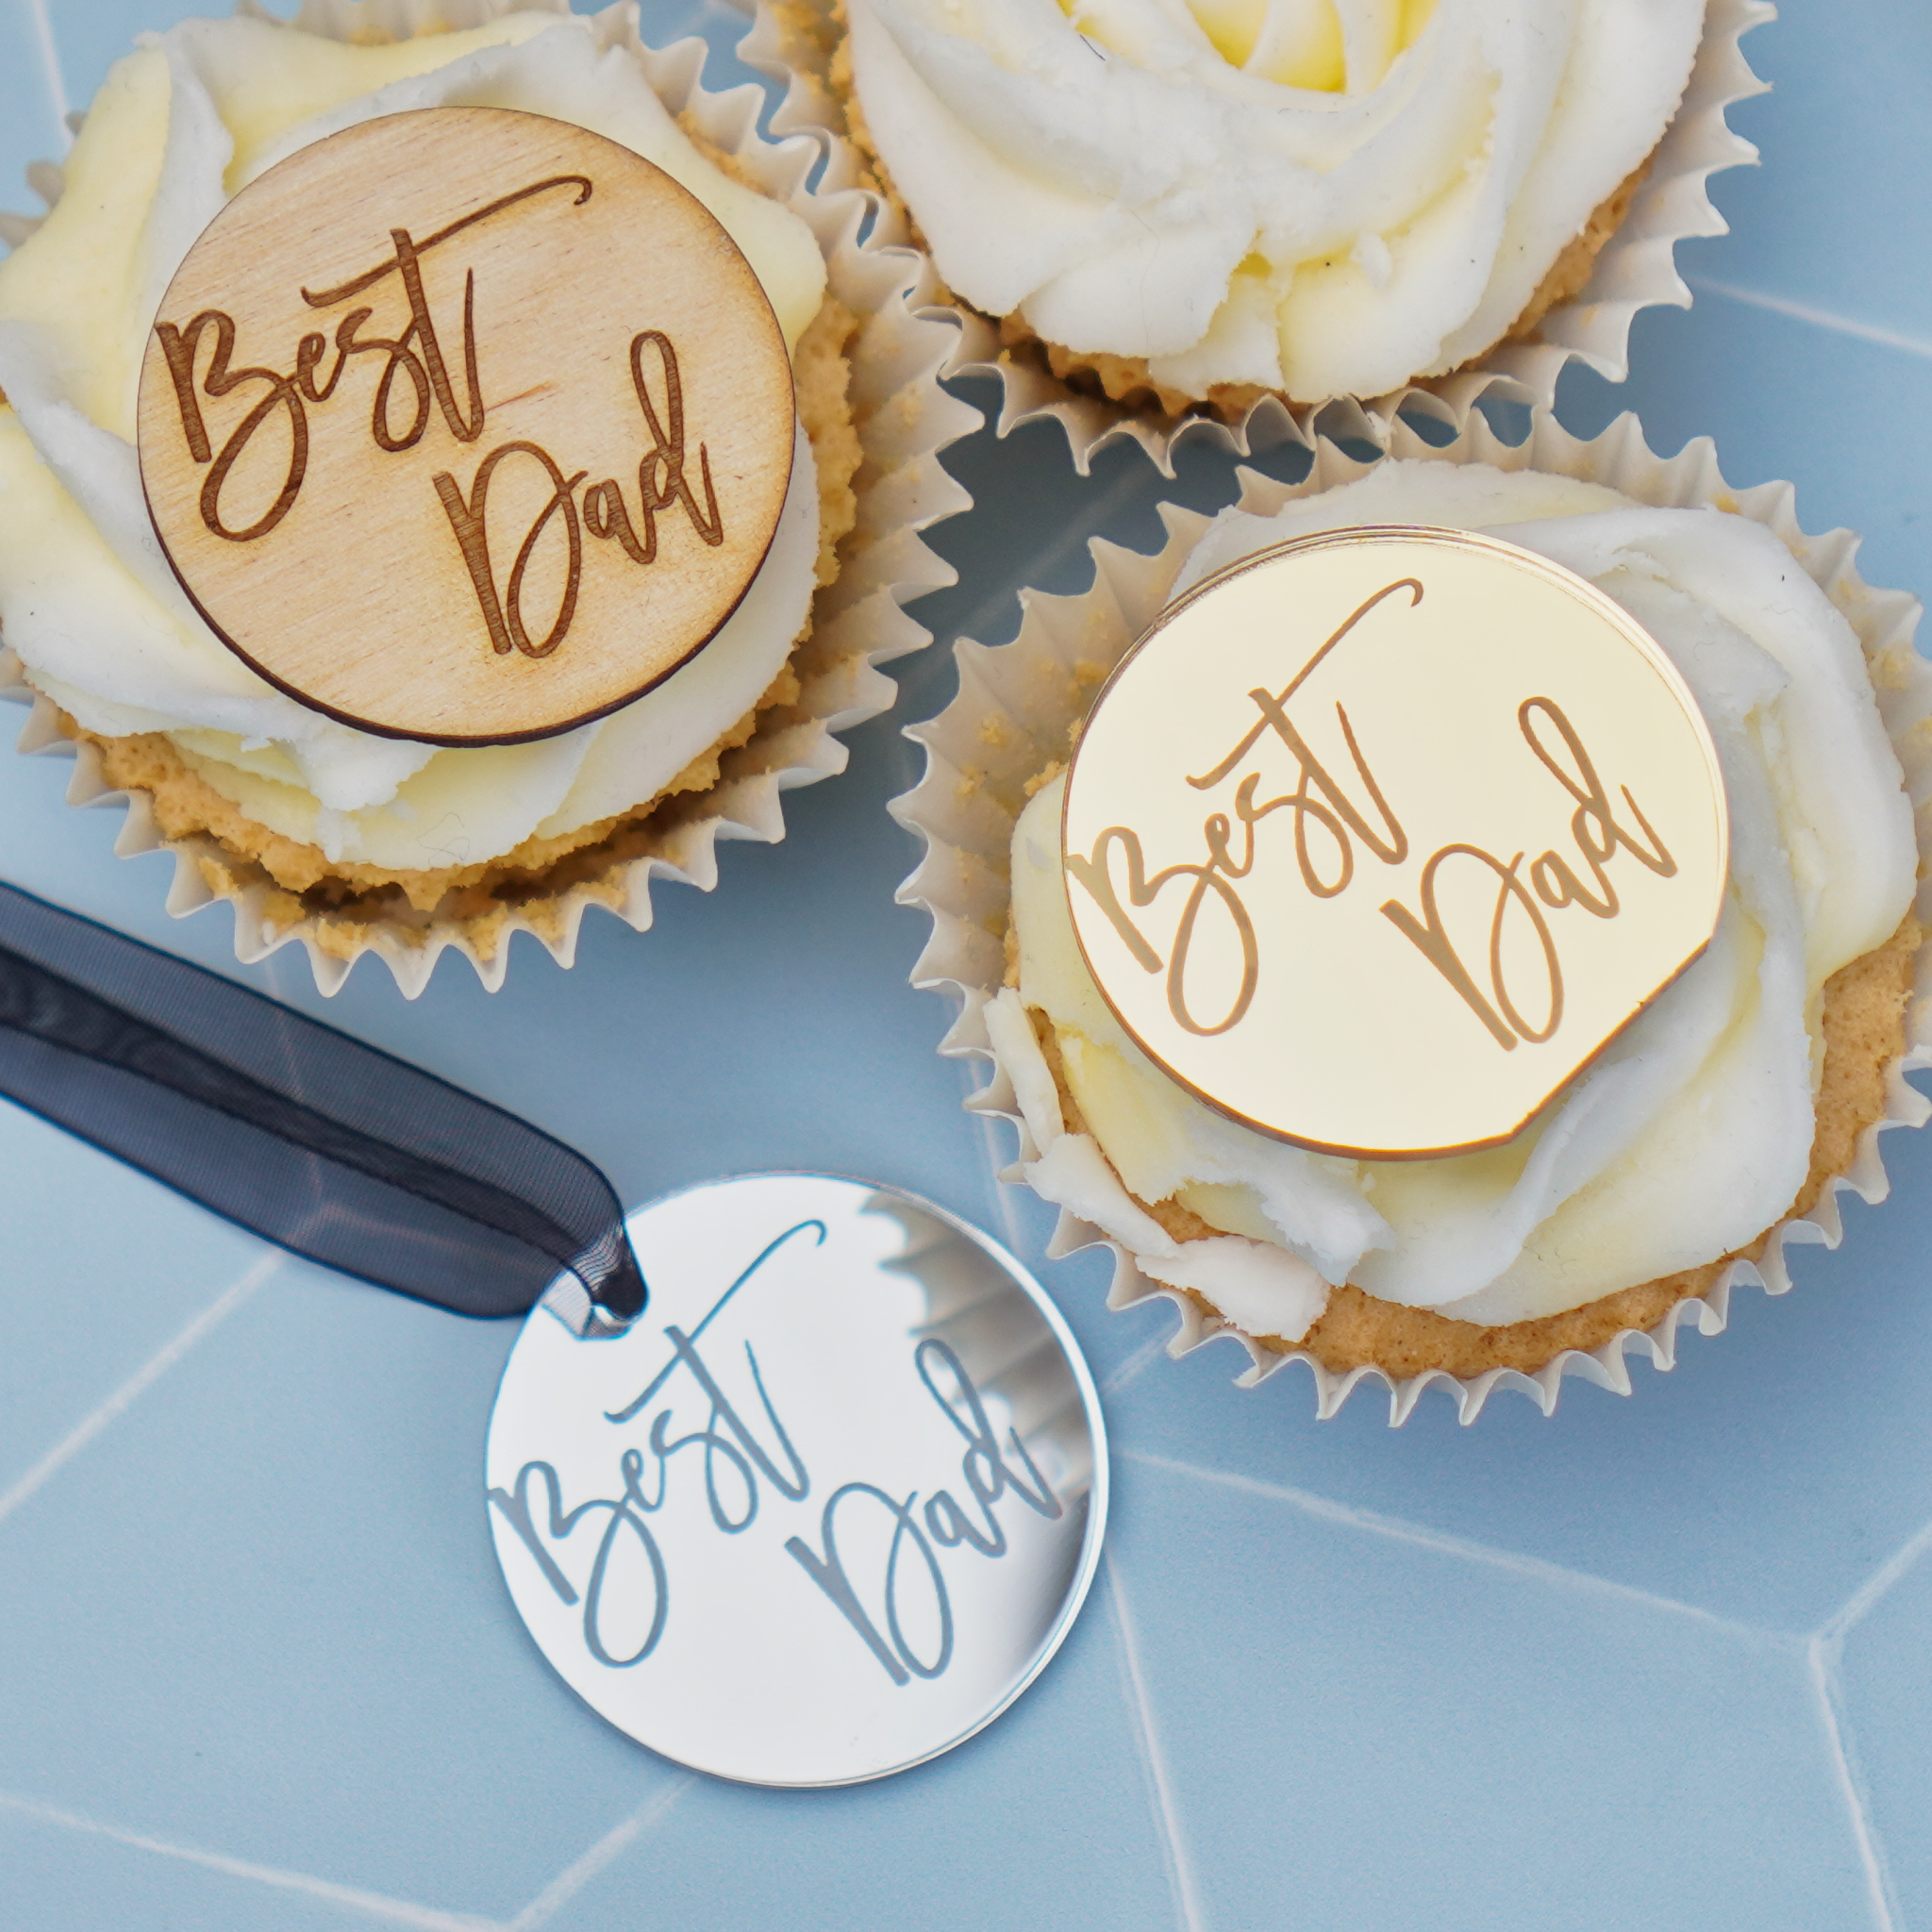 Best Dad Cake Discs or Gift Tags